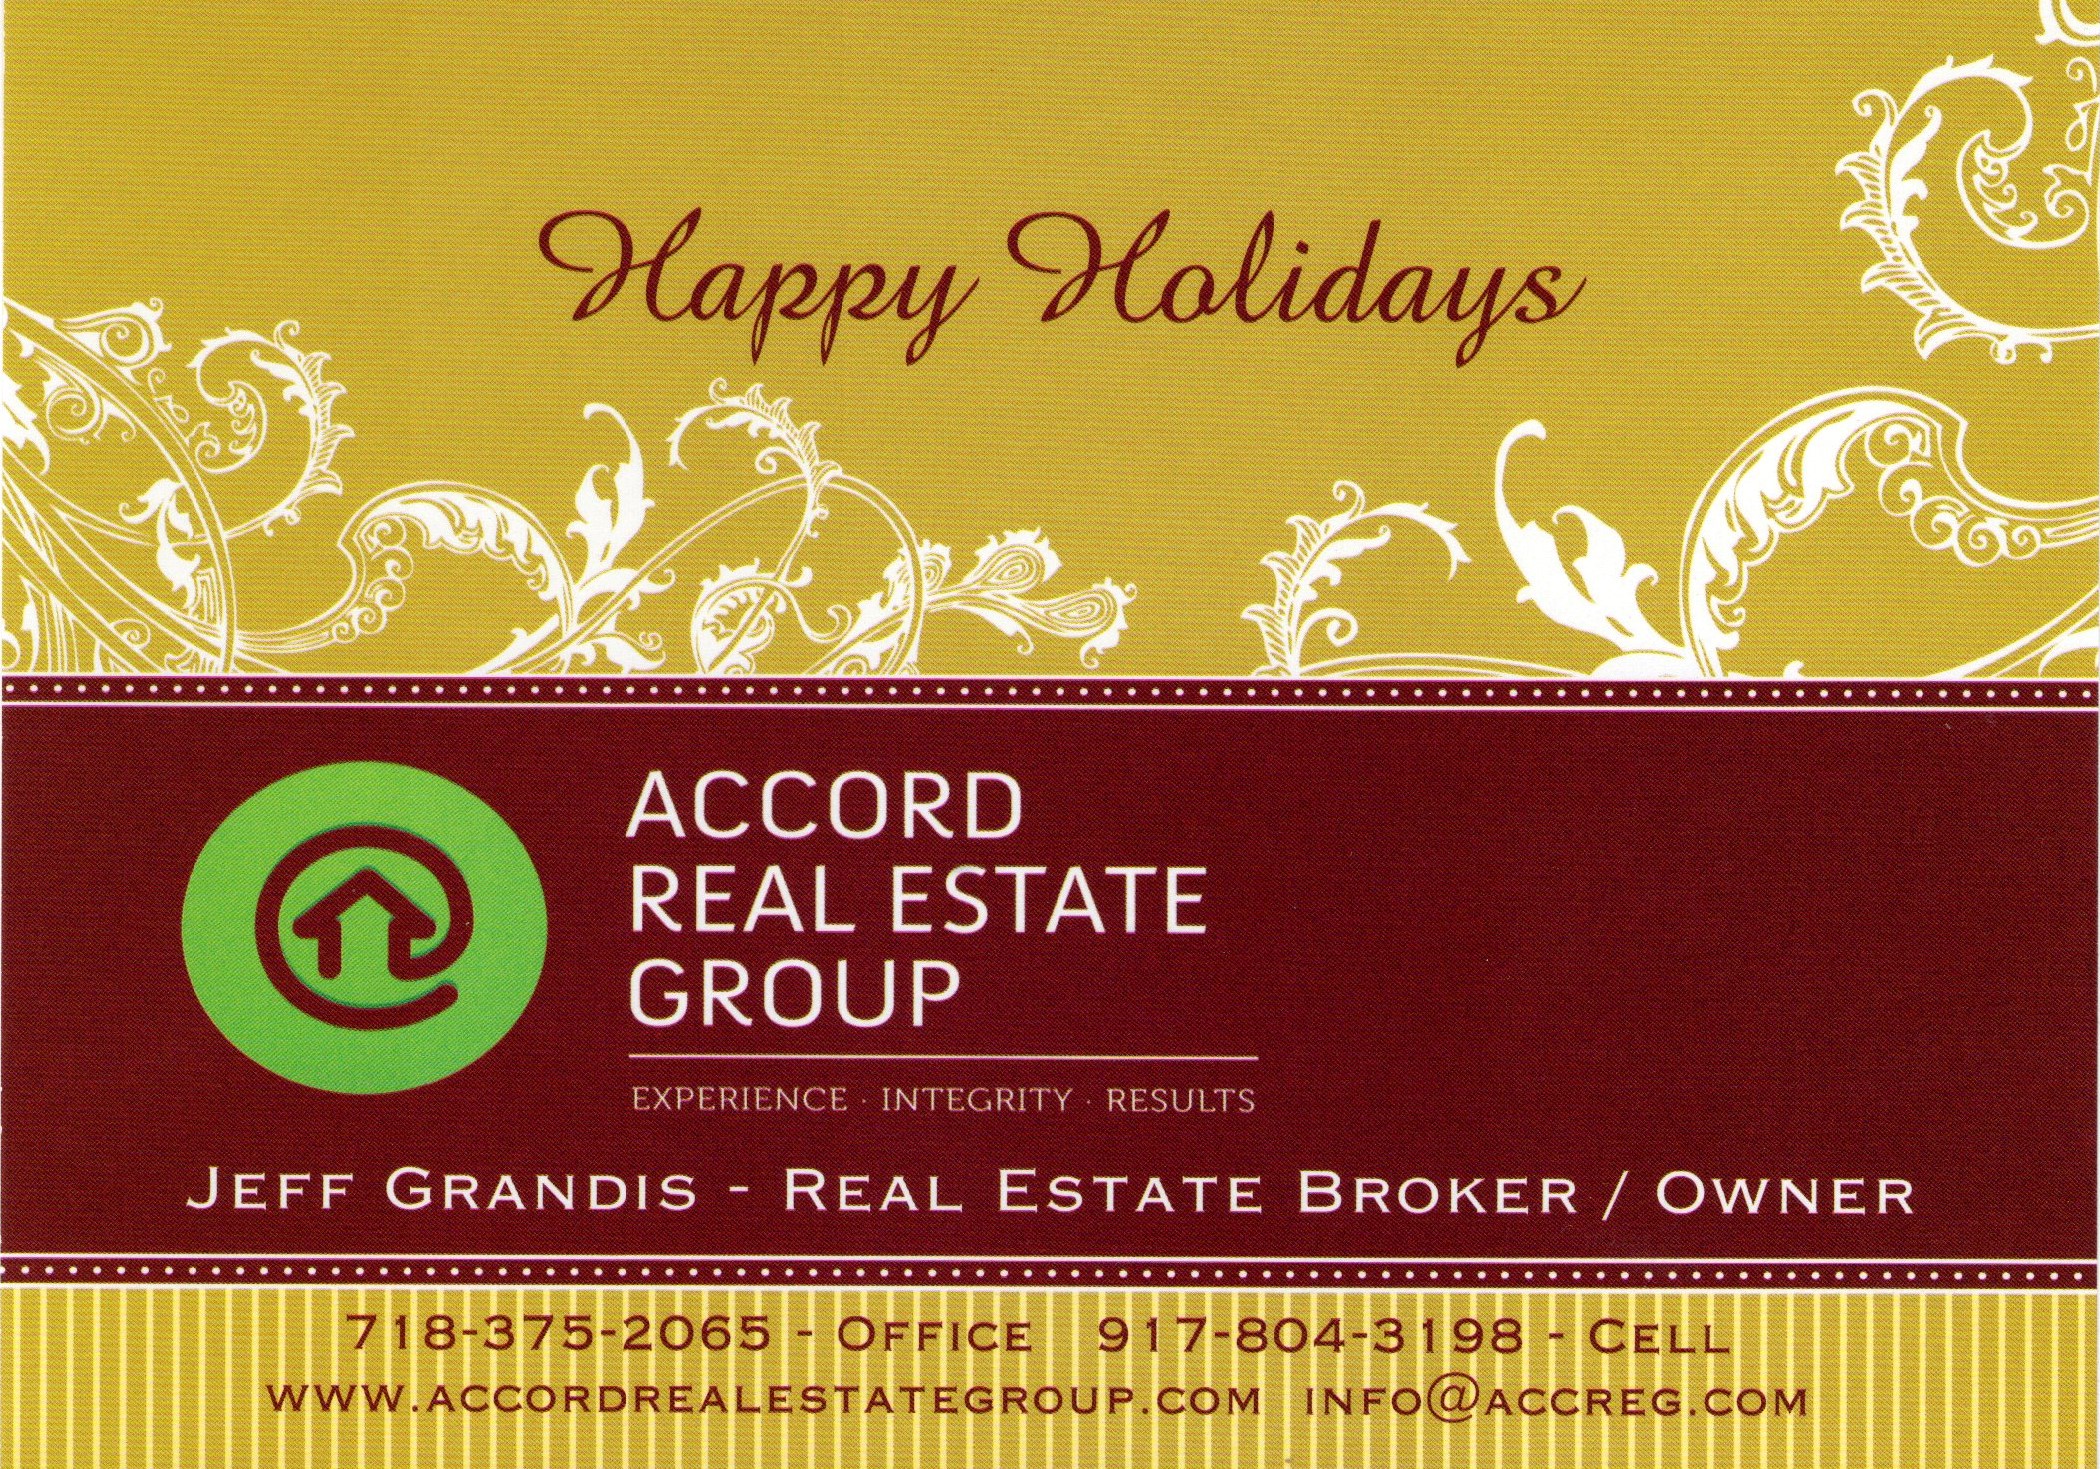 Happy Holidays from Accord Real Estate Group